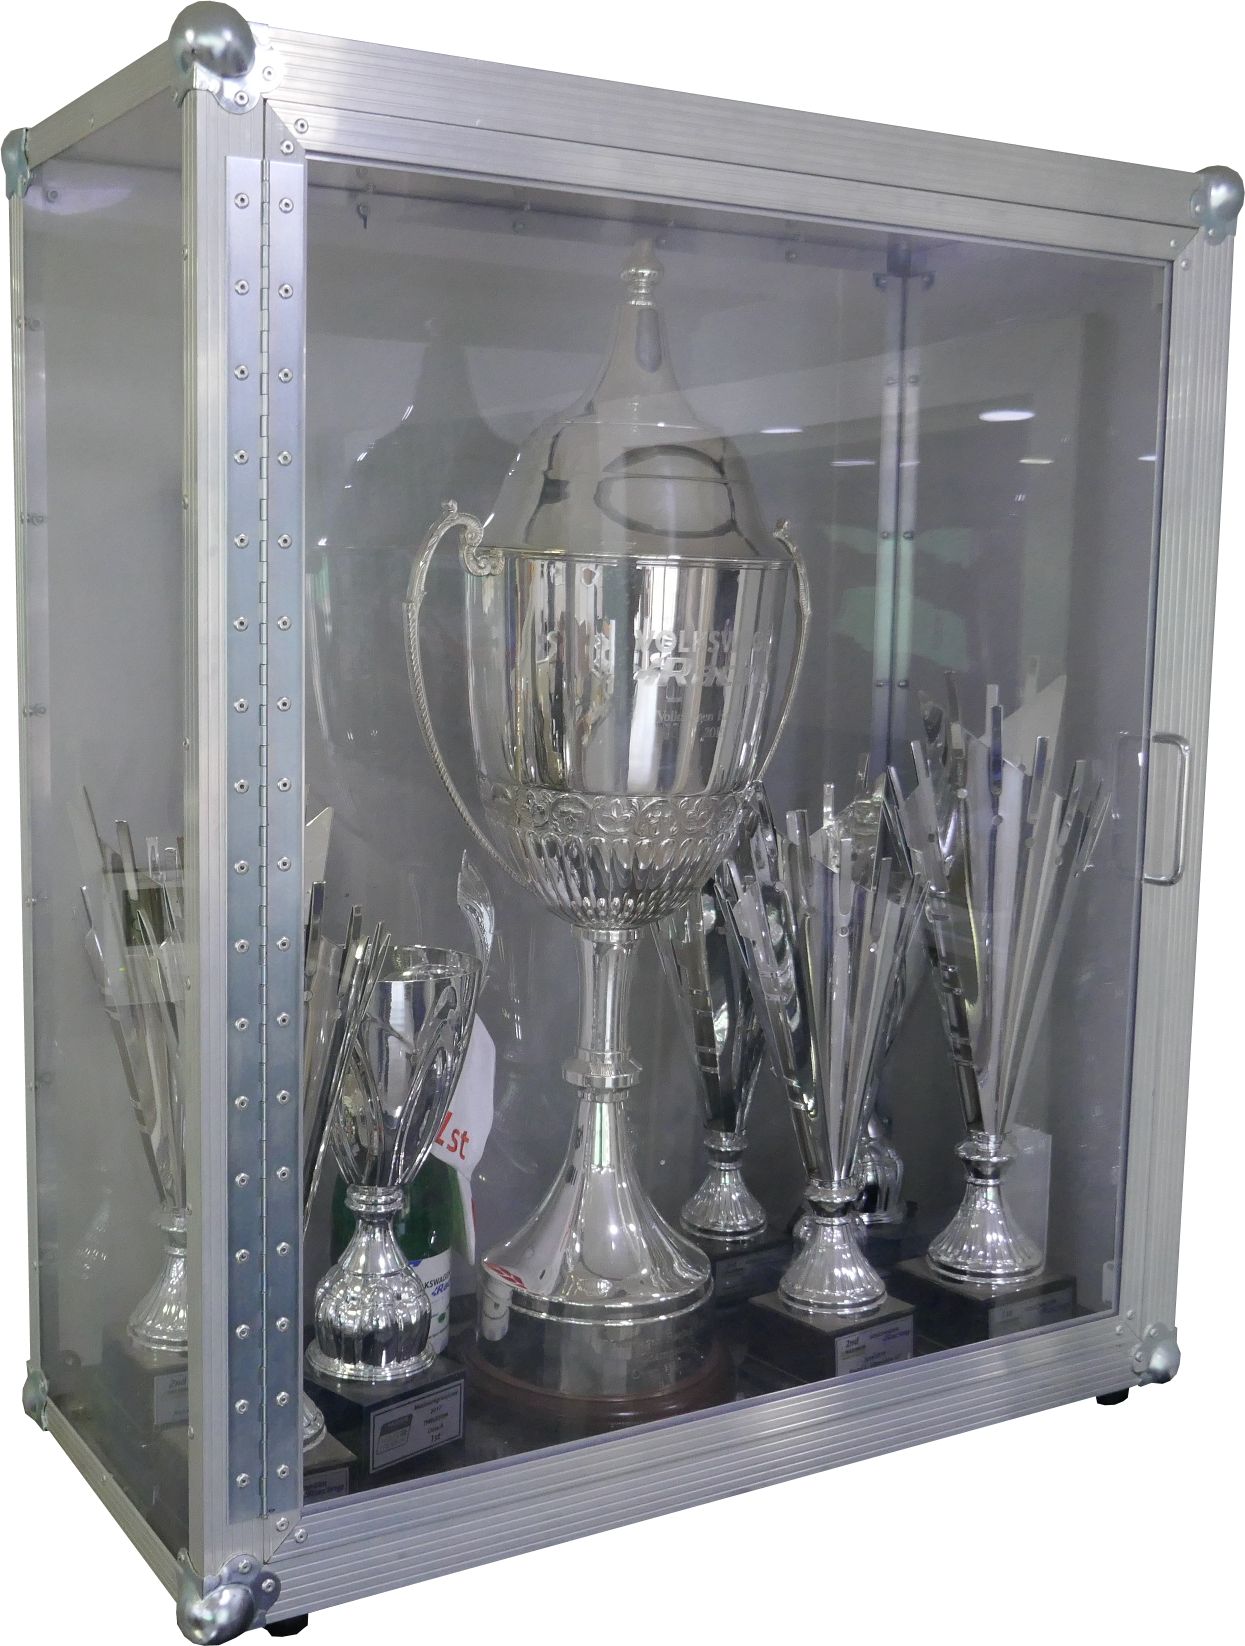 Trophy Cabinets